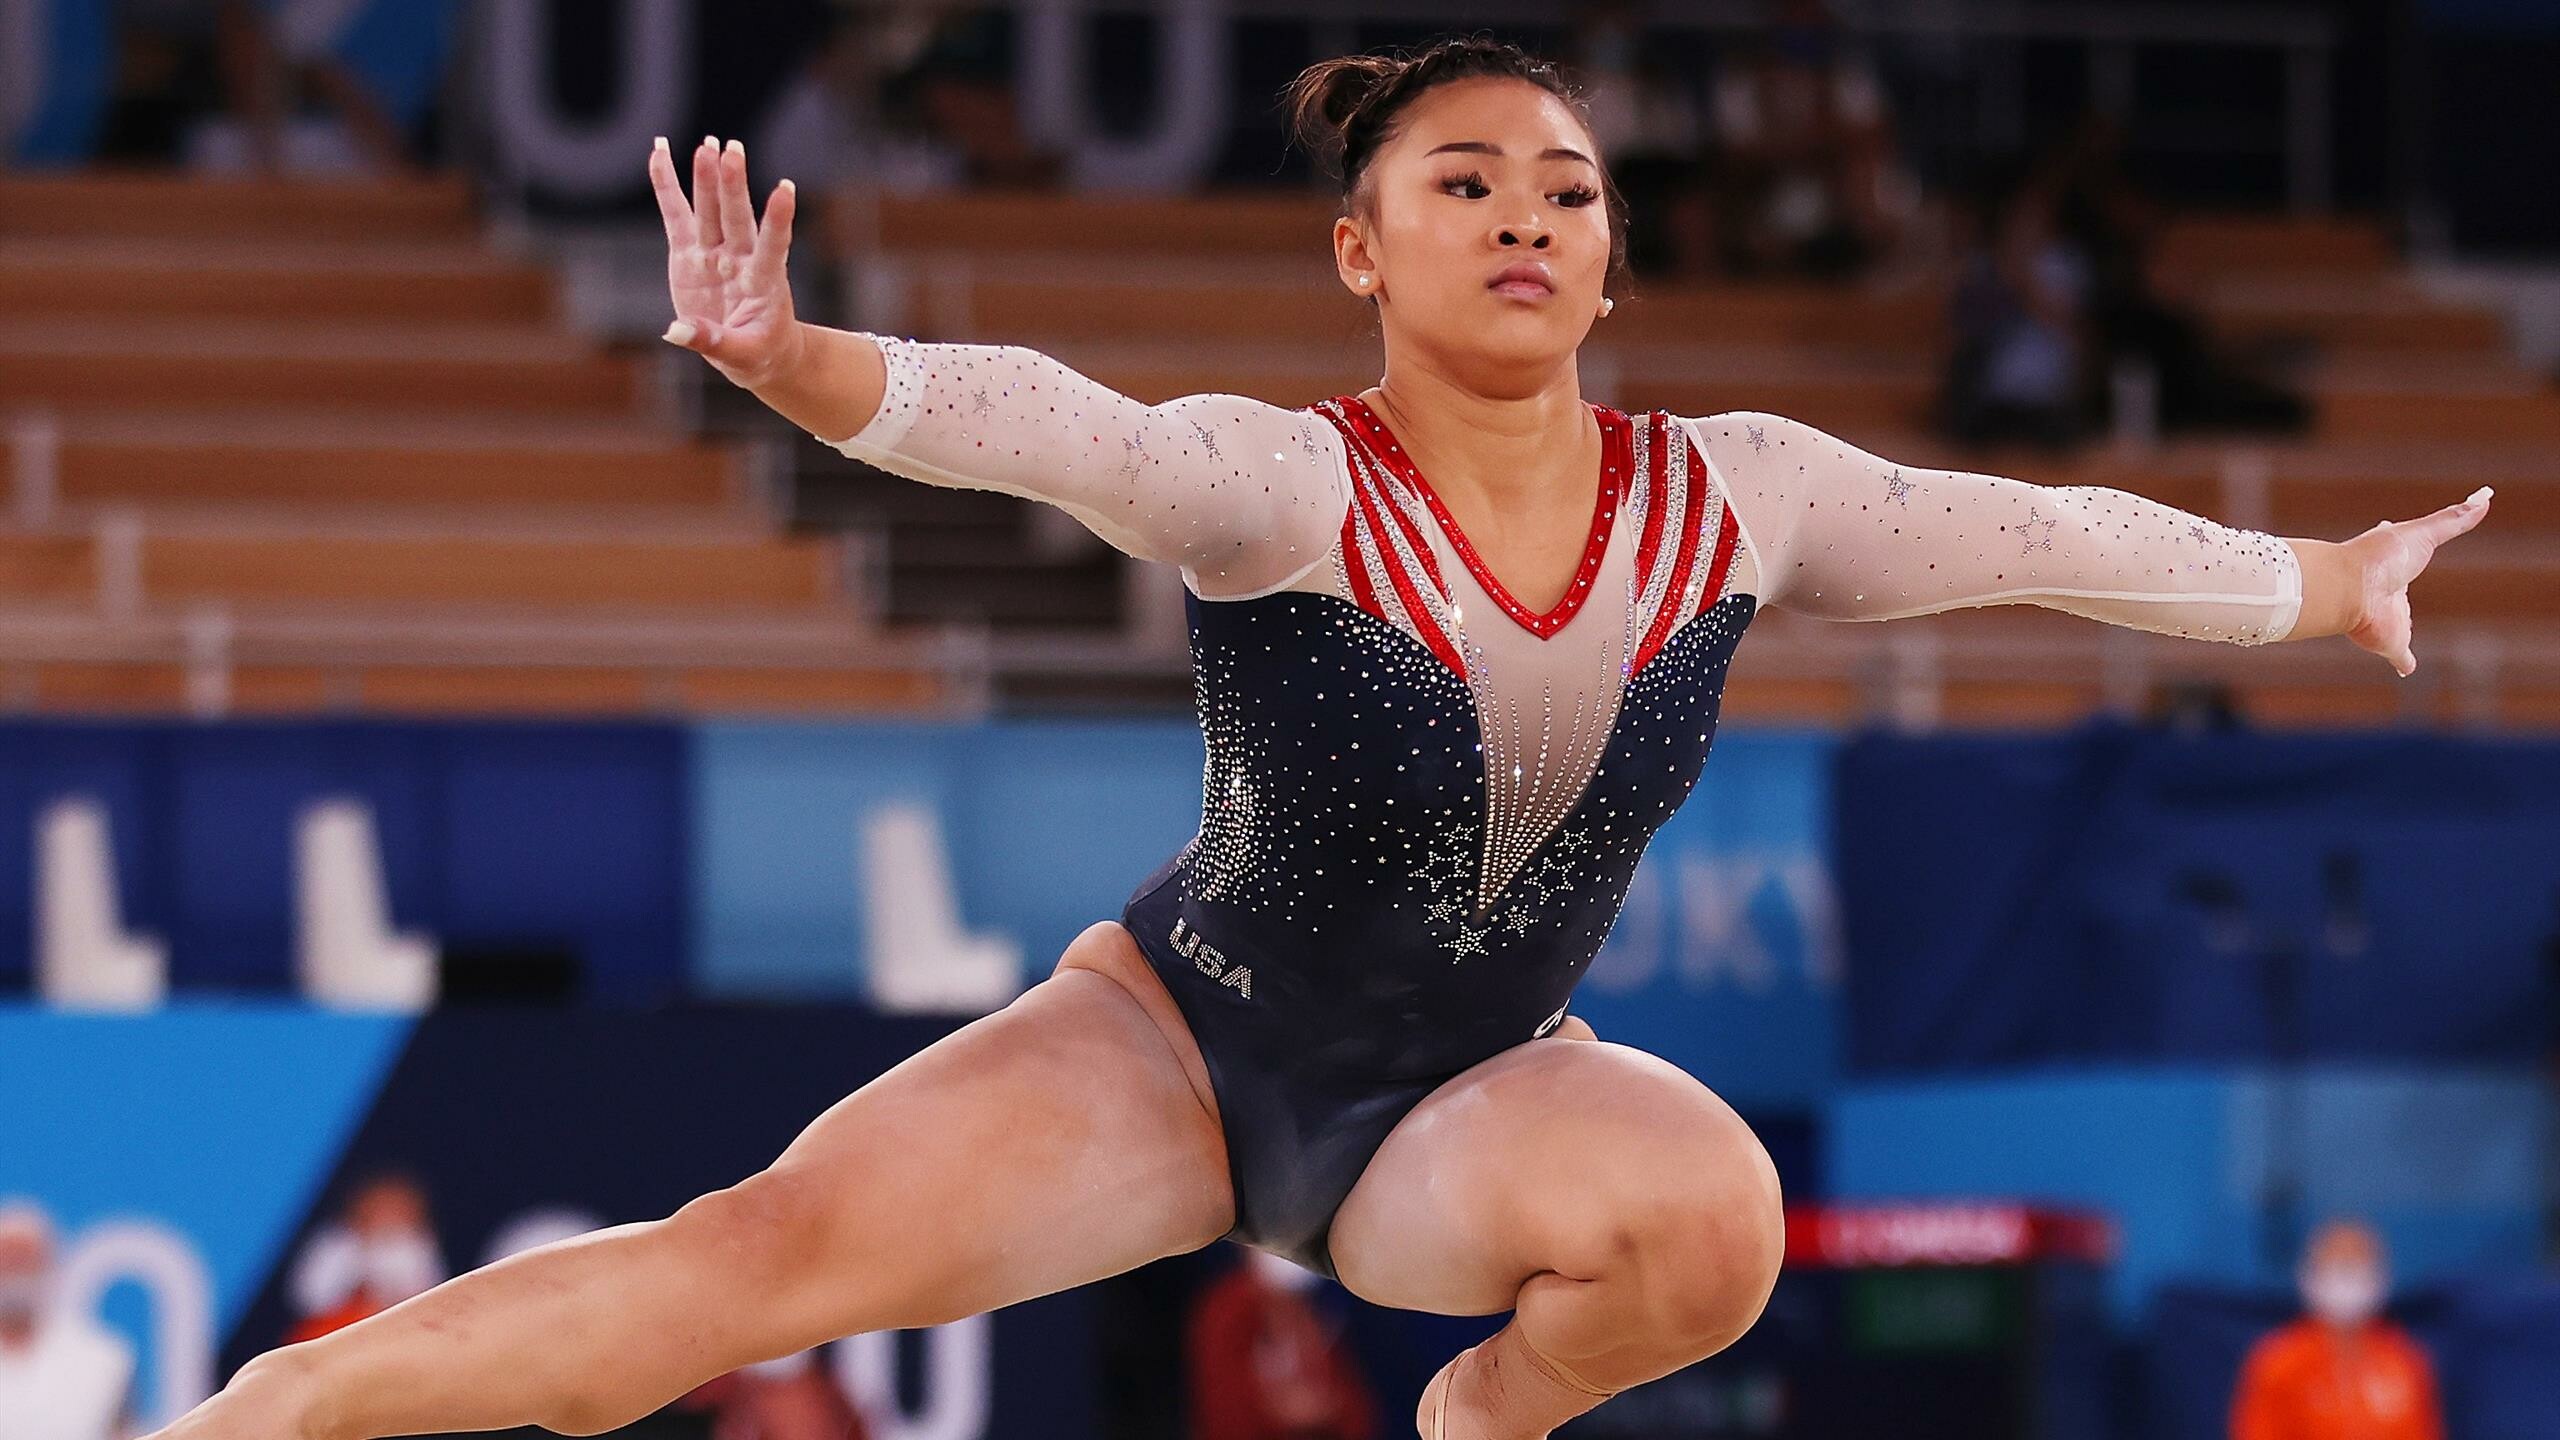 Sunisa Lee: She won the gold medal in the all-around at the 2019 City of Jesolo Trophy. 2560x1440 HD Background.